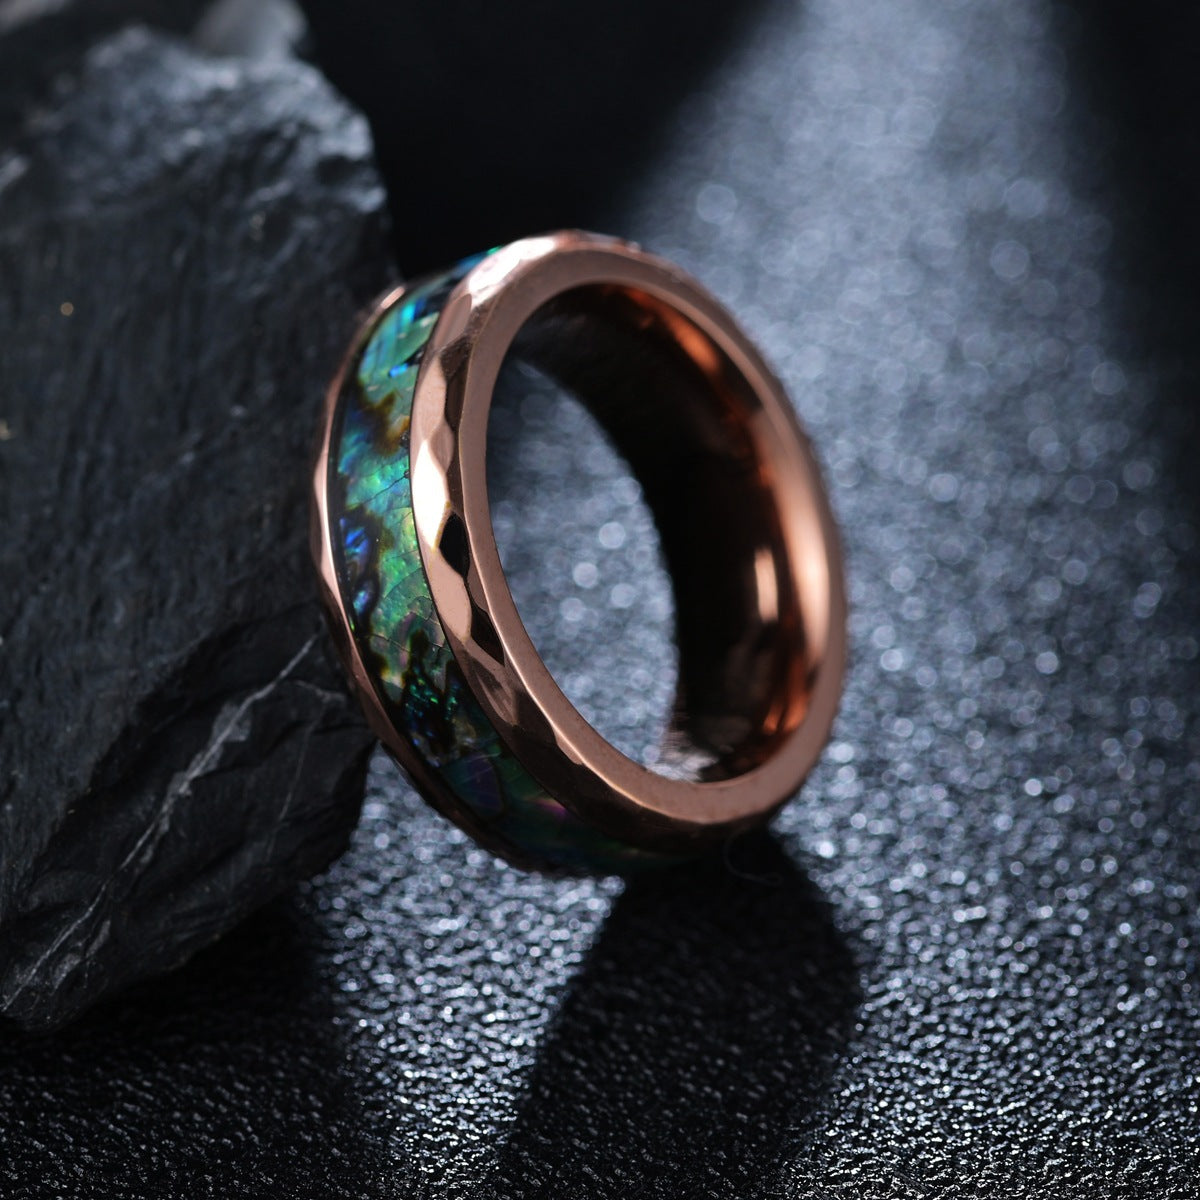 Black Rose Gold Tungsten Steel Men's Ring with Abalone Shell - Wholesale Jewelry for Men